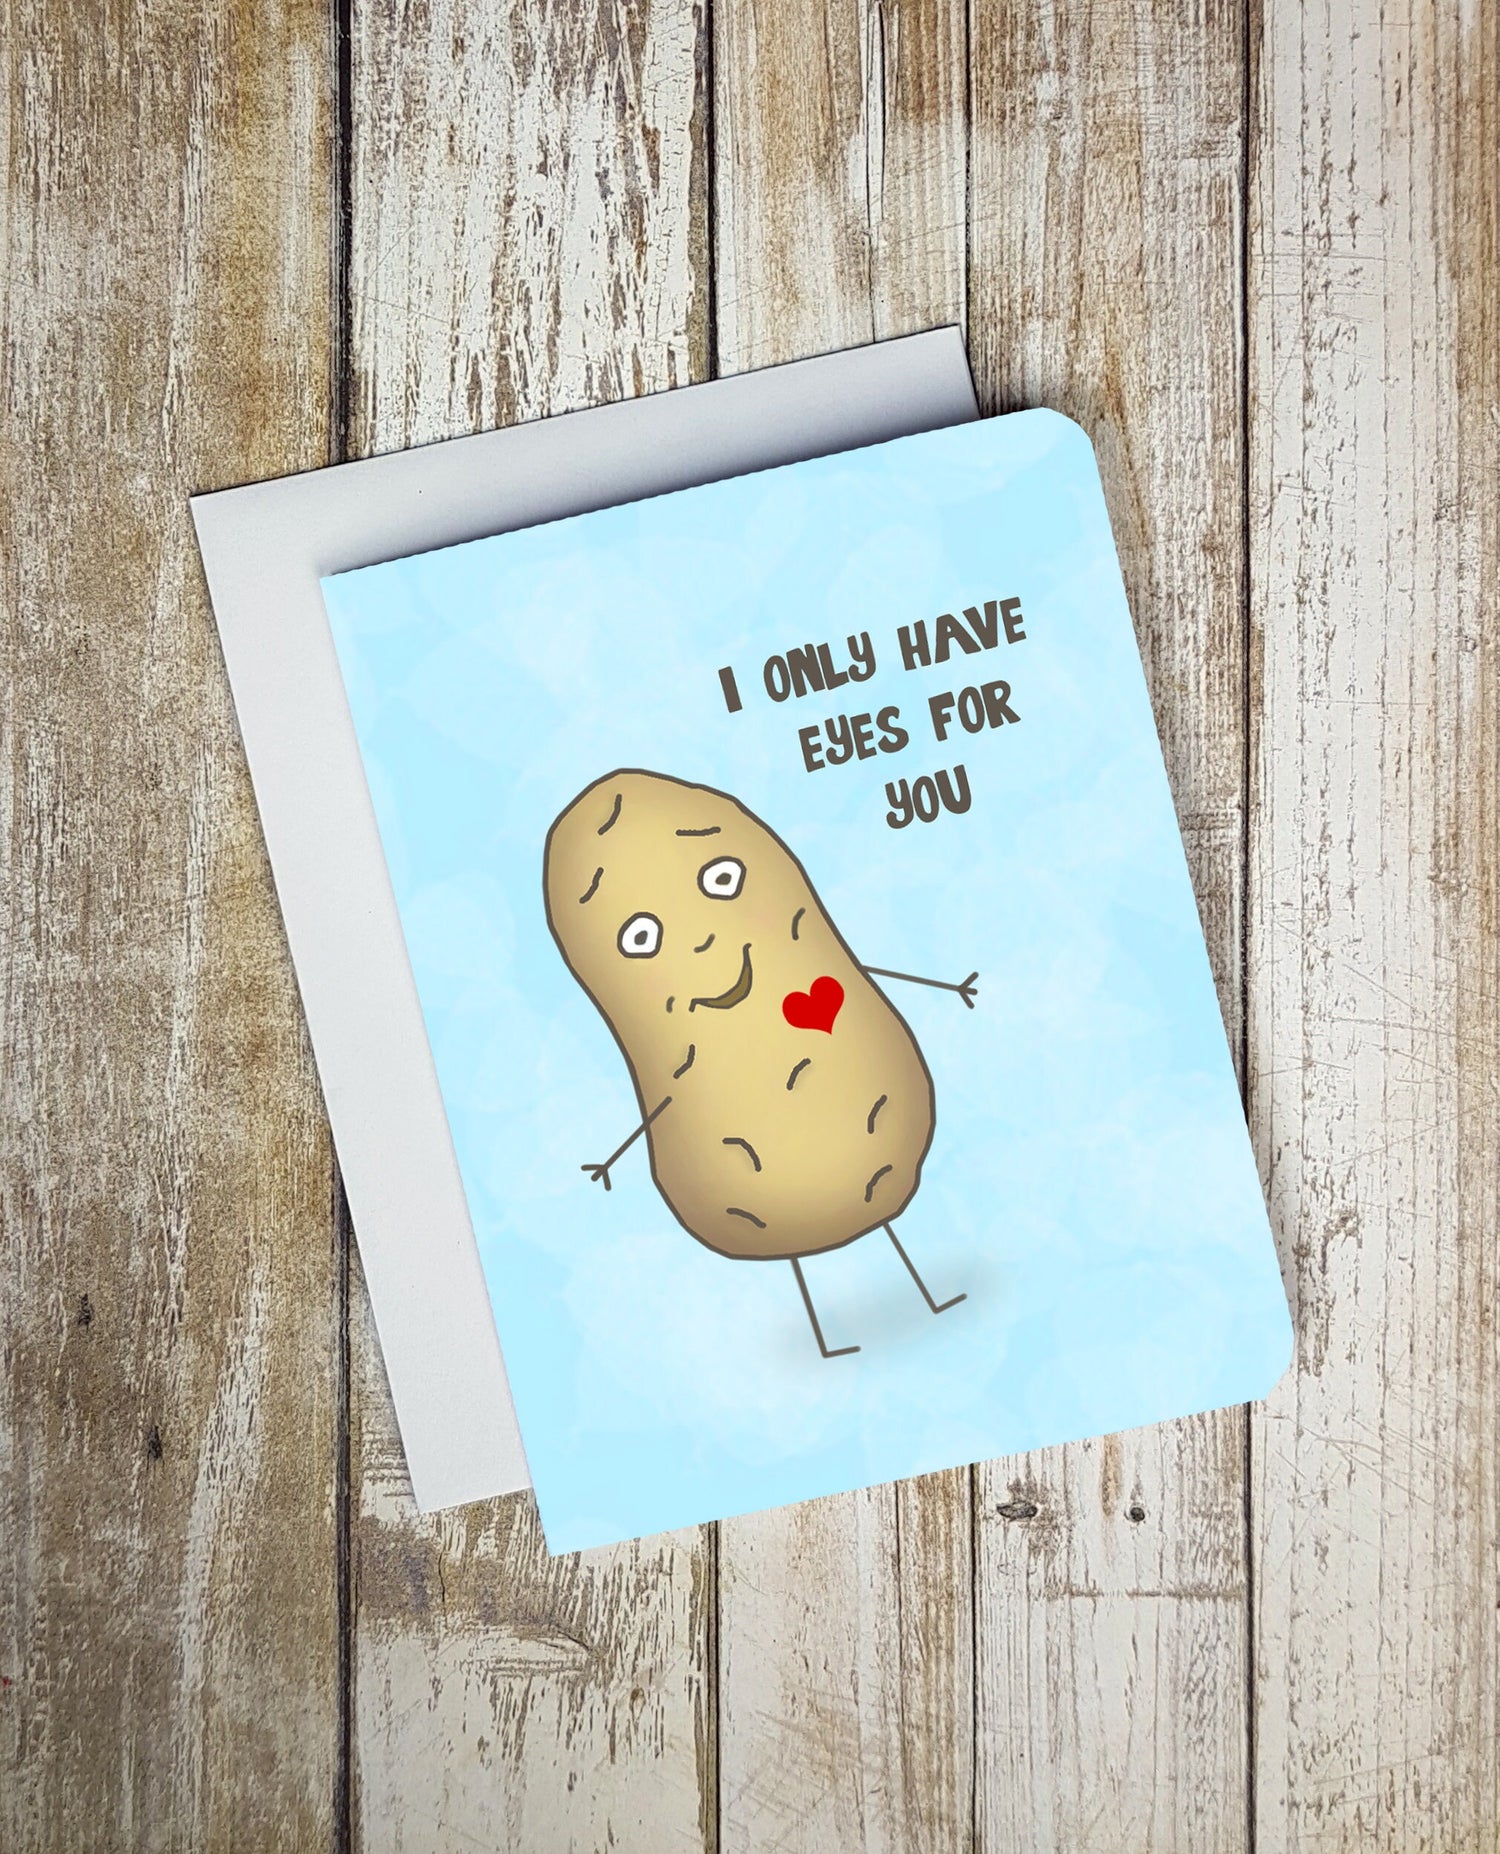 A photo of a smiling cartoon potato. It has a heart on it. Text reads 'I only have eyes for you.'